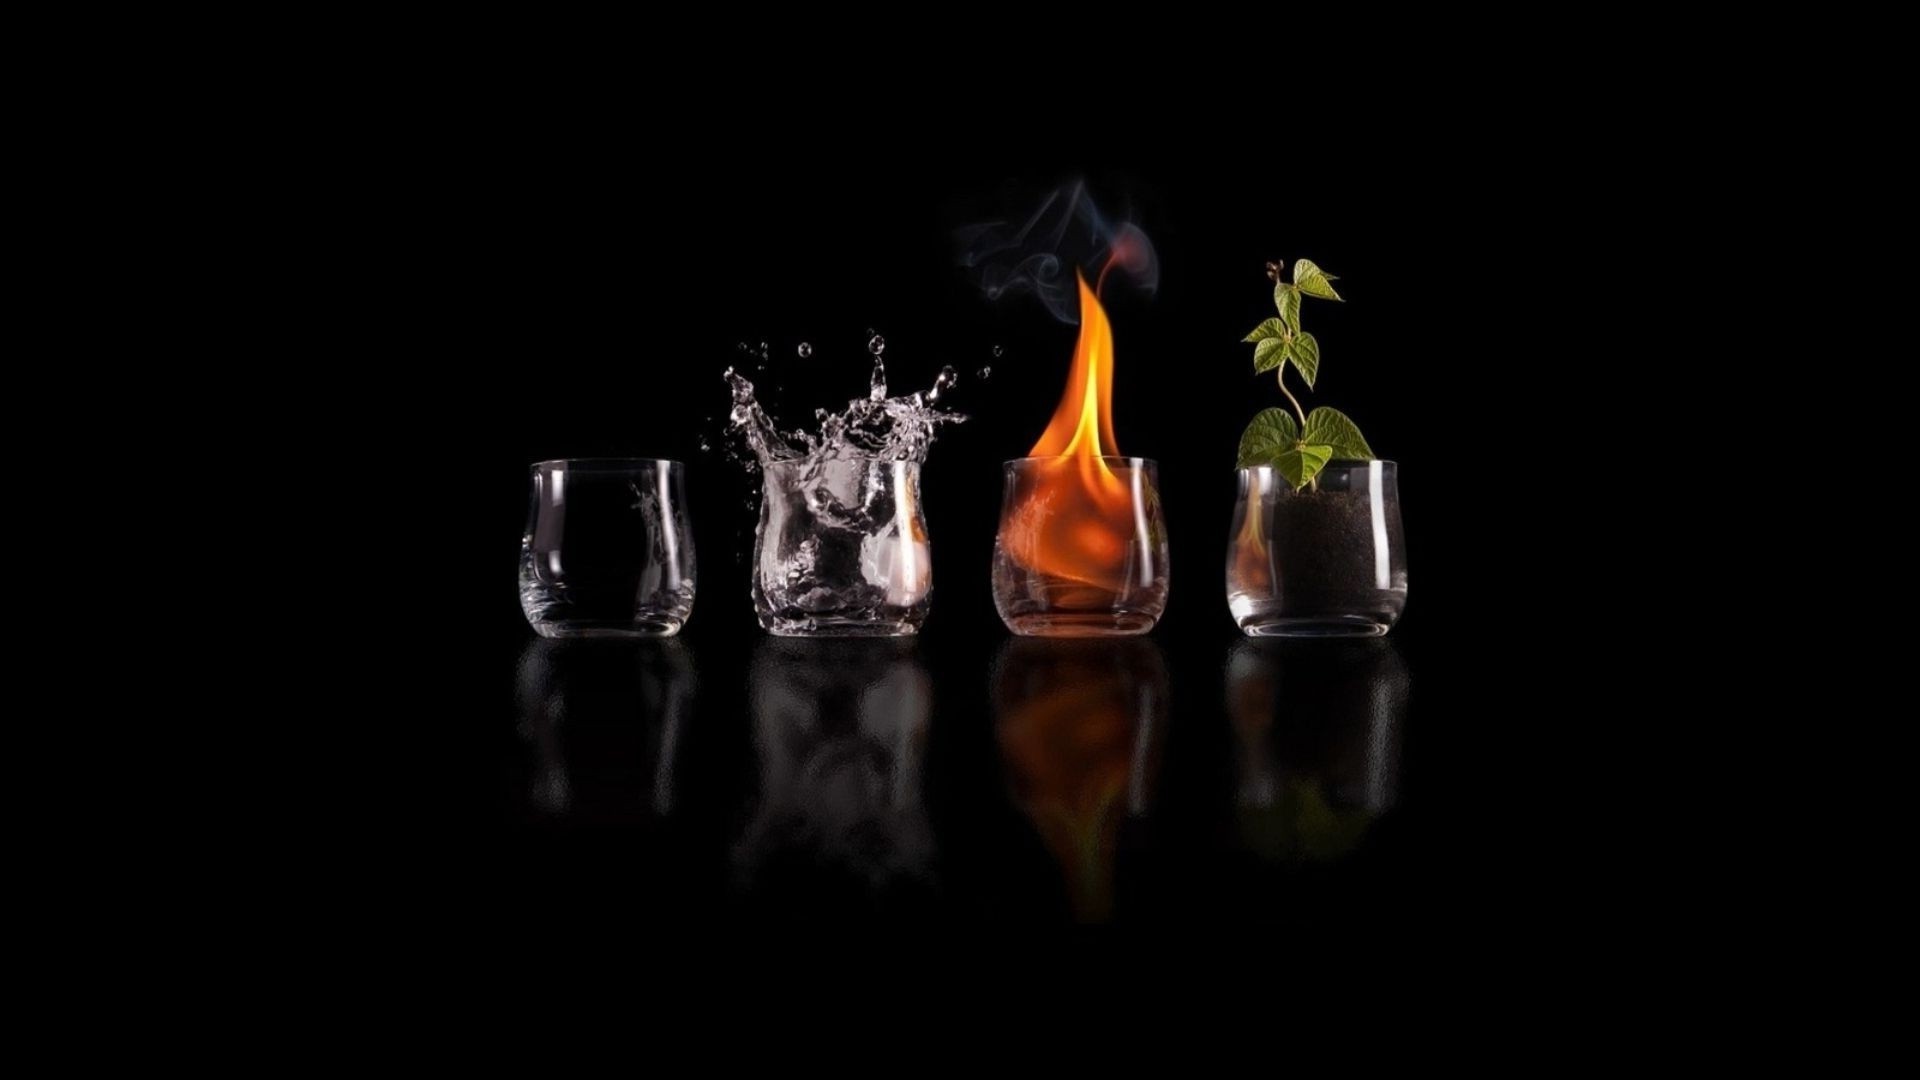 four Elements, Nature, Drinking Glass, Fire, Water, Plants, Science Fiction, Elements, Black Wallpaper